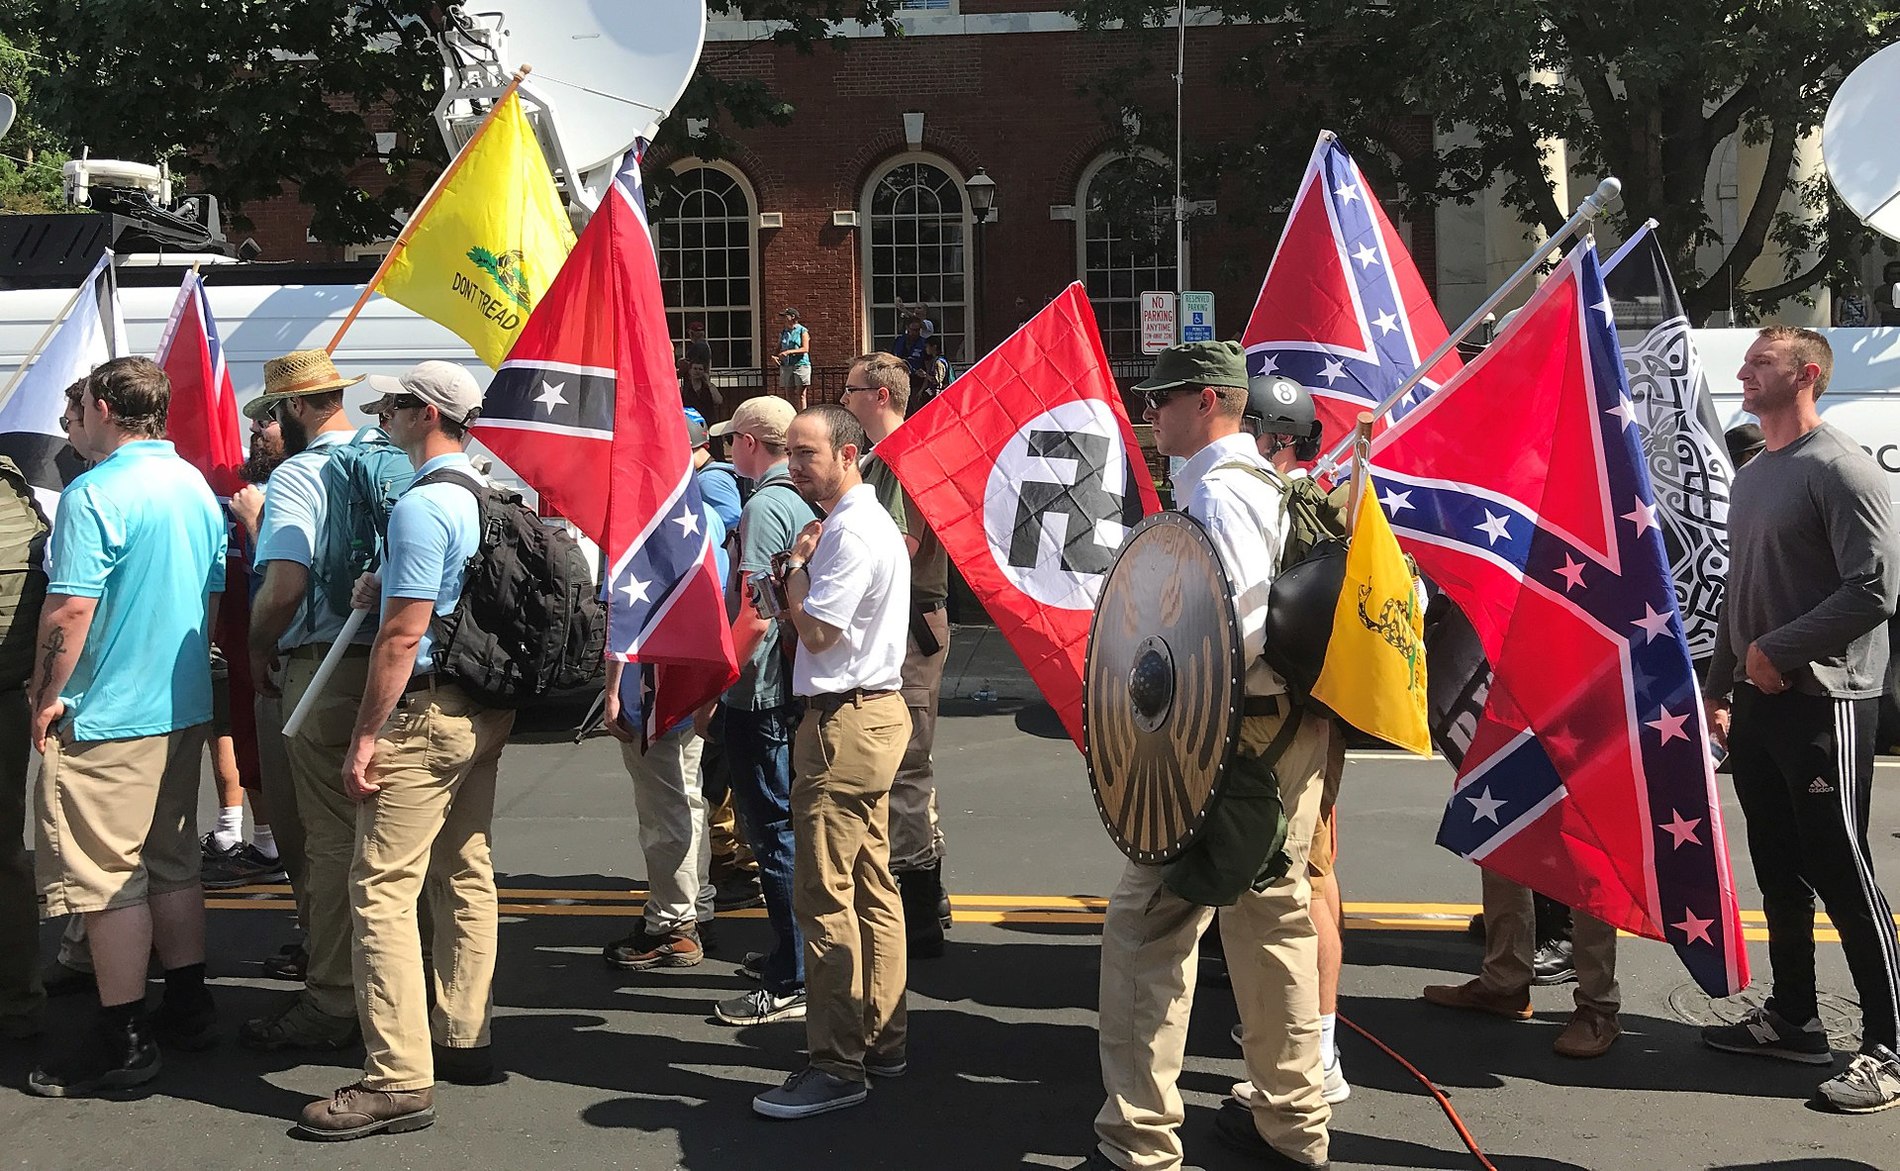 1920px-Charlottesville_%27Unite_the_Right%27_Rally_%2835780274914%29_crop.jpg